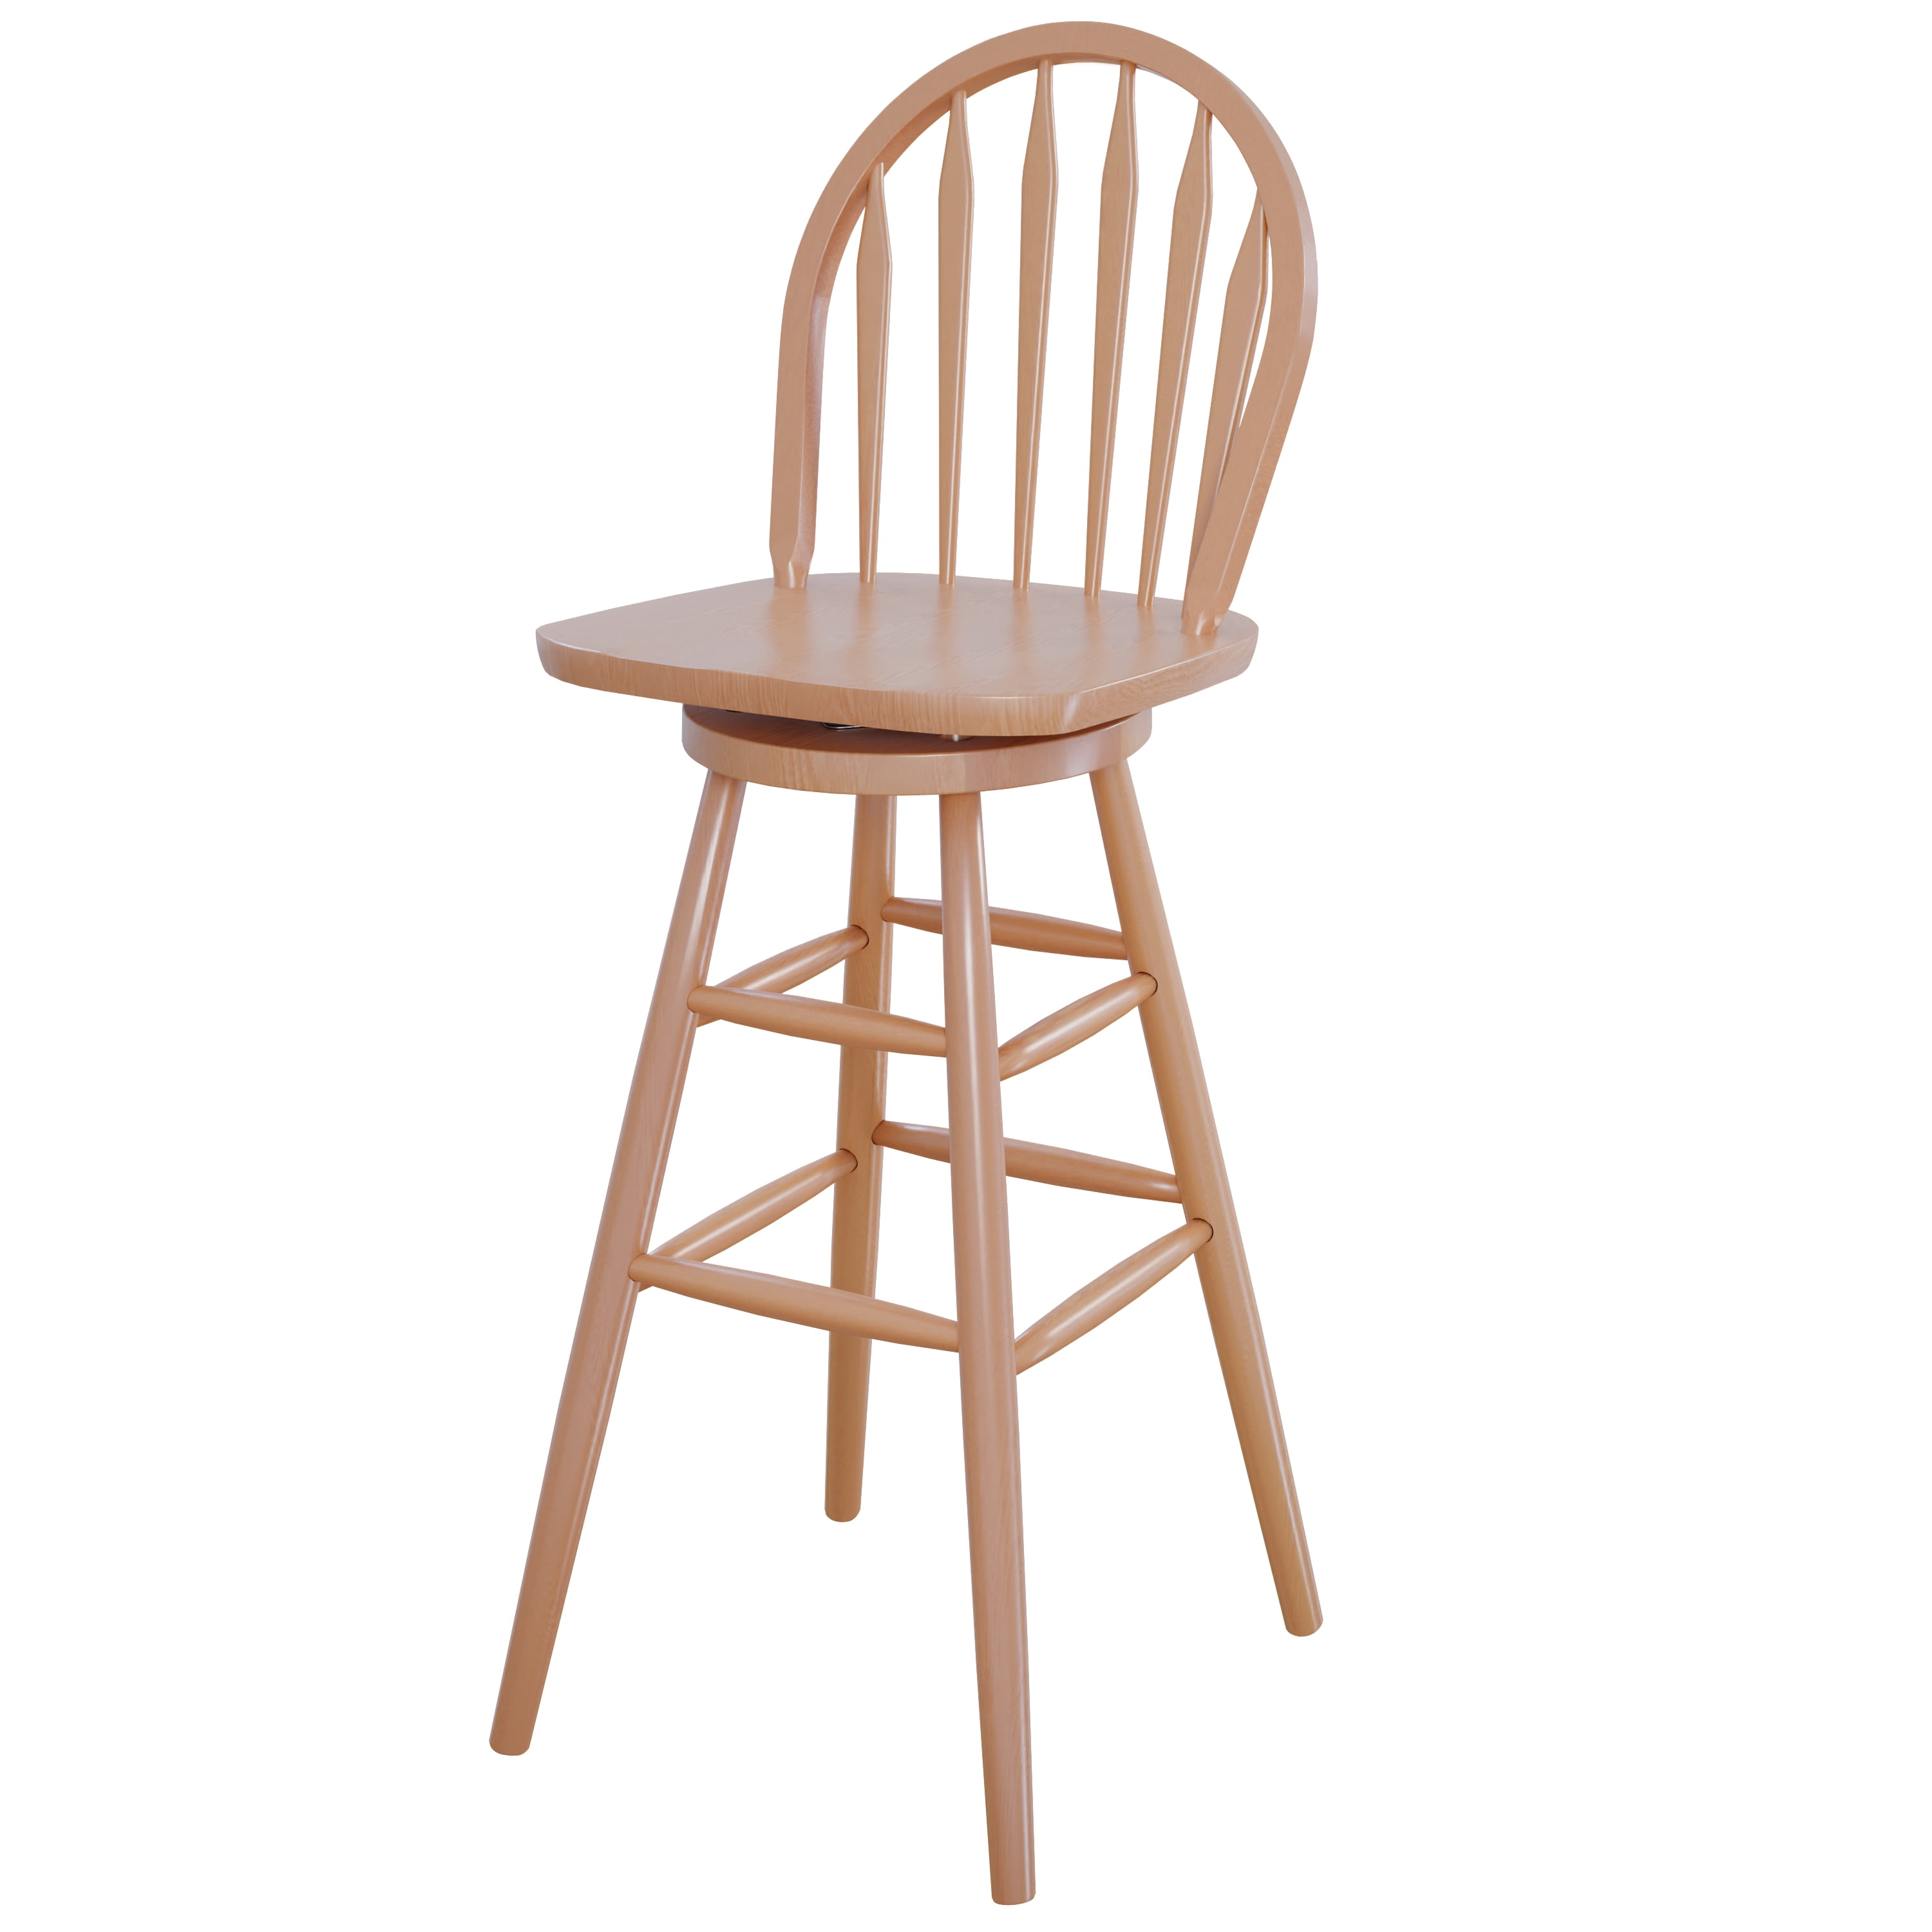 Winsome Wood Wagner Arrow Back Swivel Seat Bar Stool Natural Finish